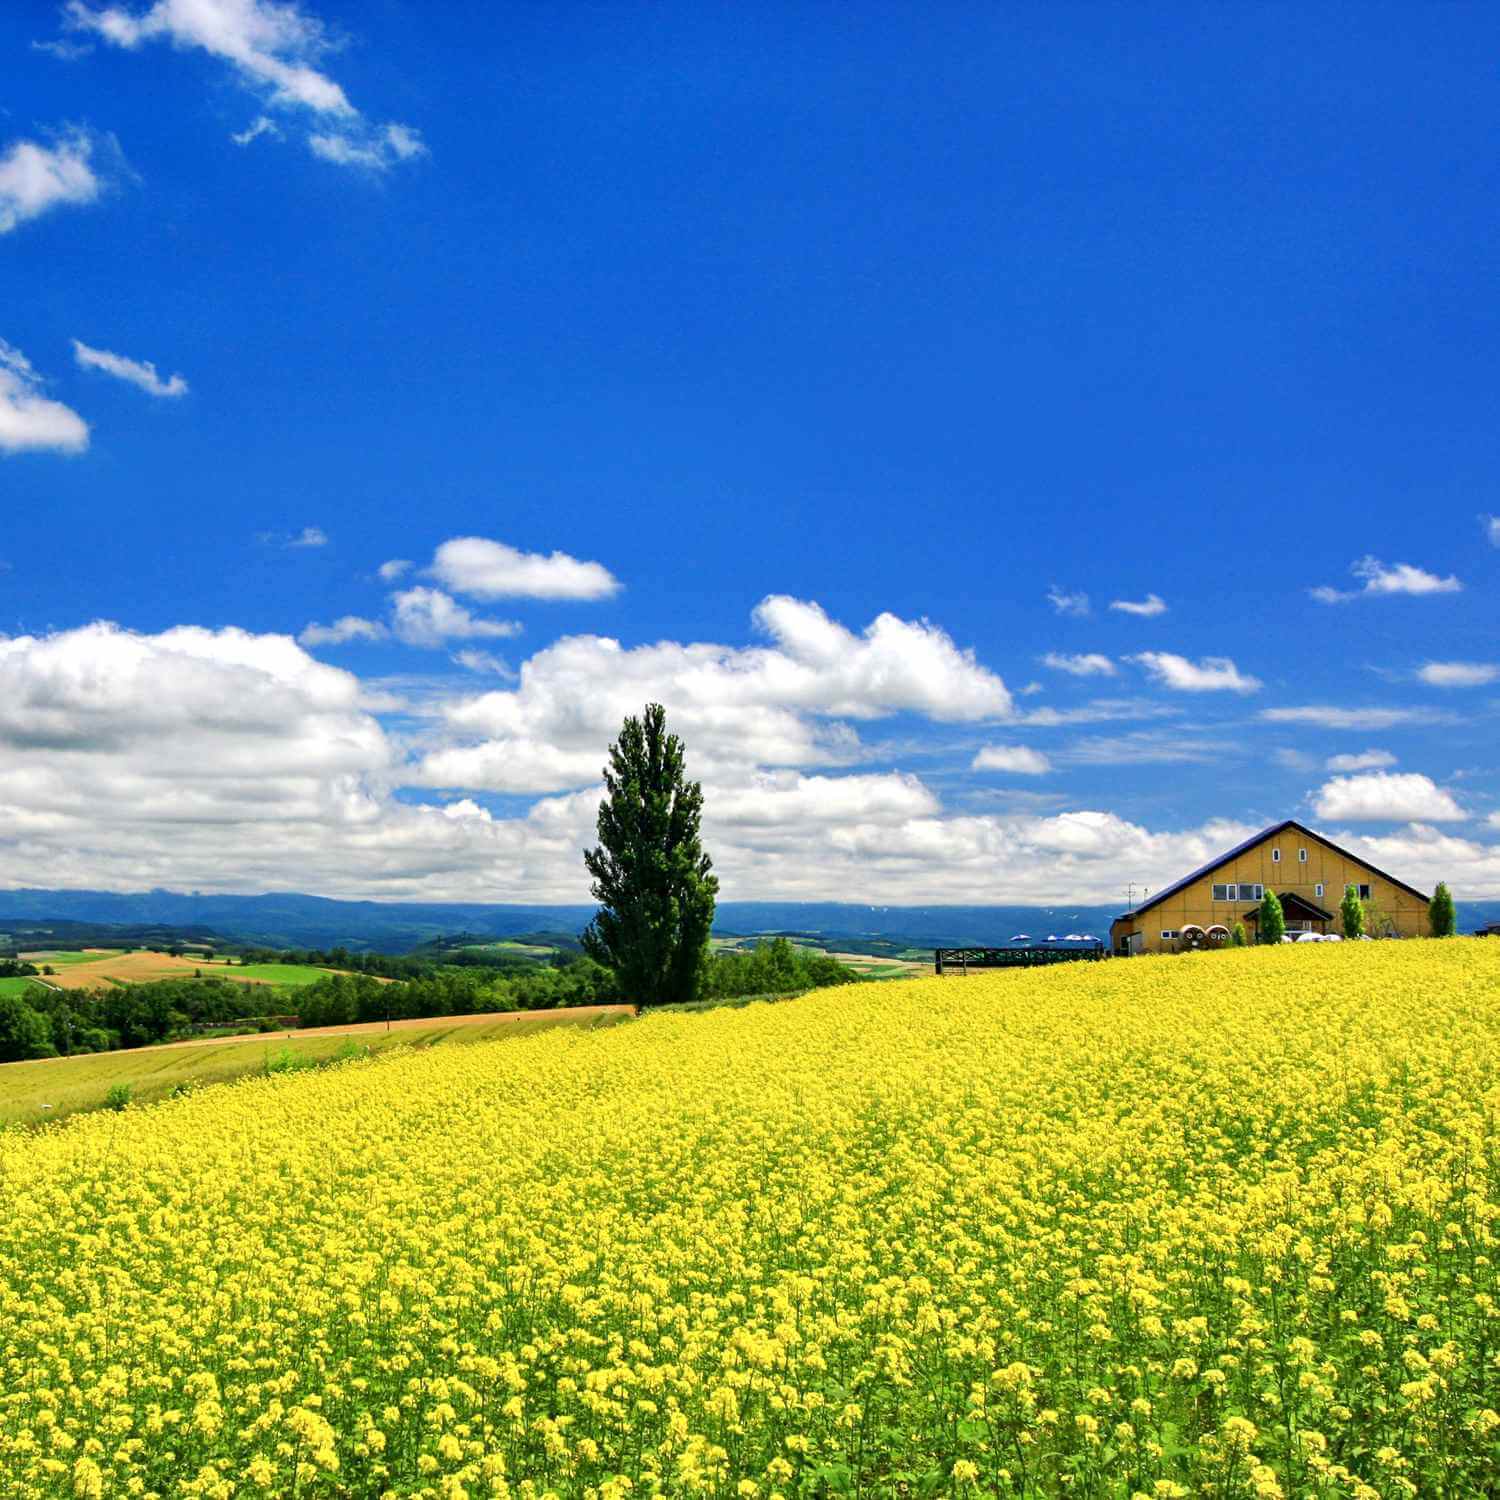 Biei is well-known as a town with many picturesque beautiful hills. Field mustard, or na flower in Japanese, usually gets in full bloom in June and July in Hokkaido = Shutterstock